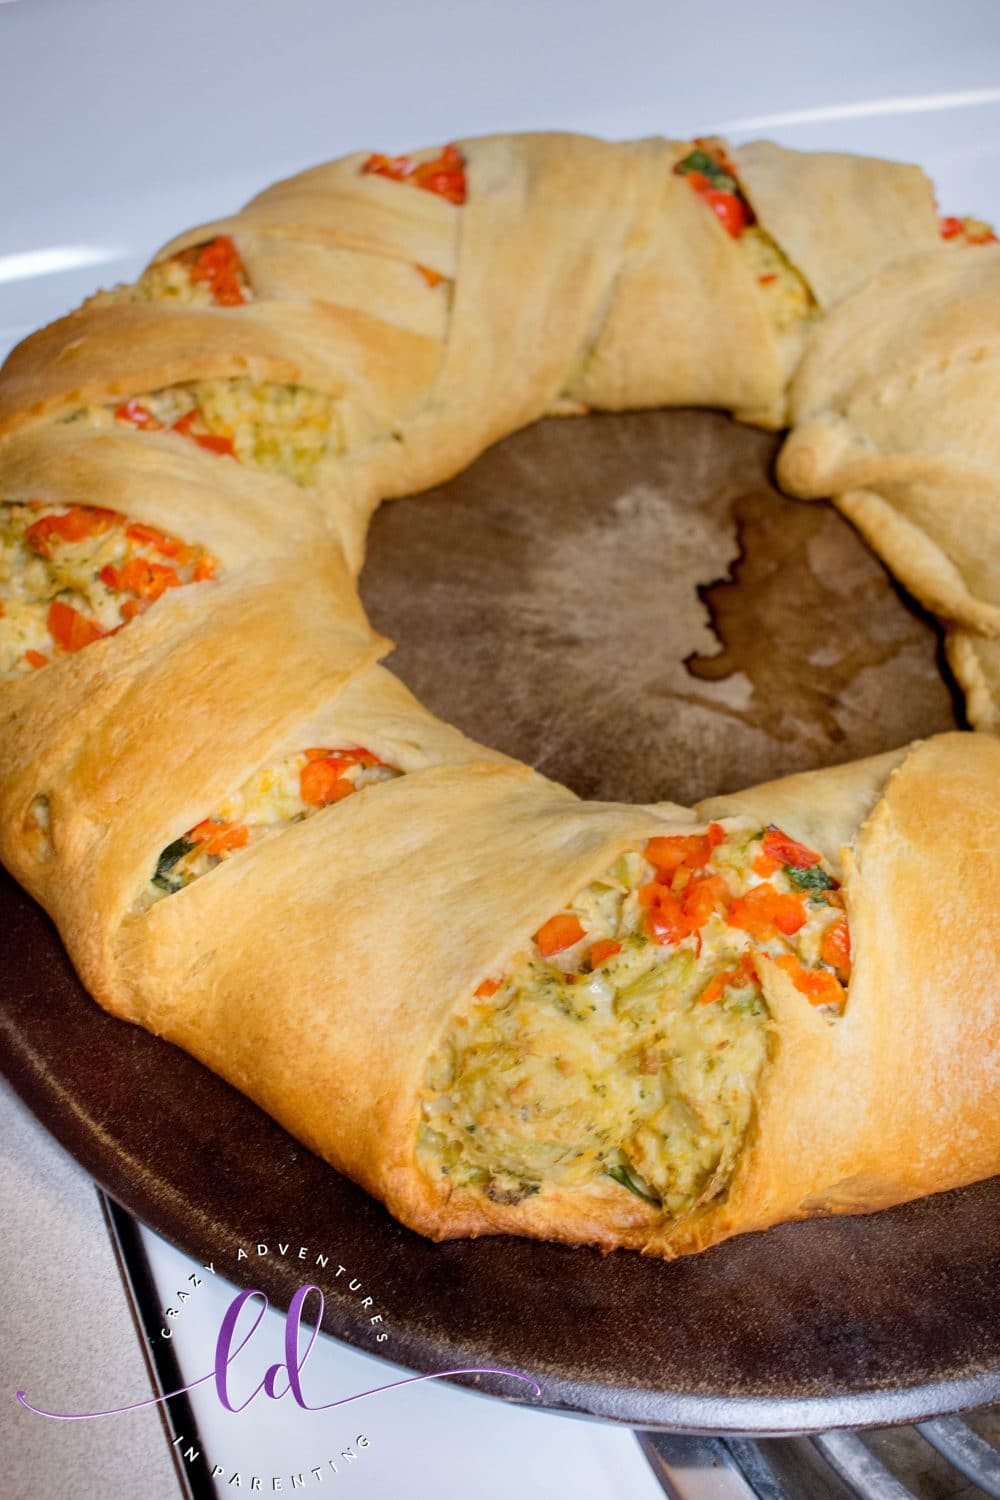 Baked and Ready Chicken Broccoli Wreath